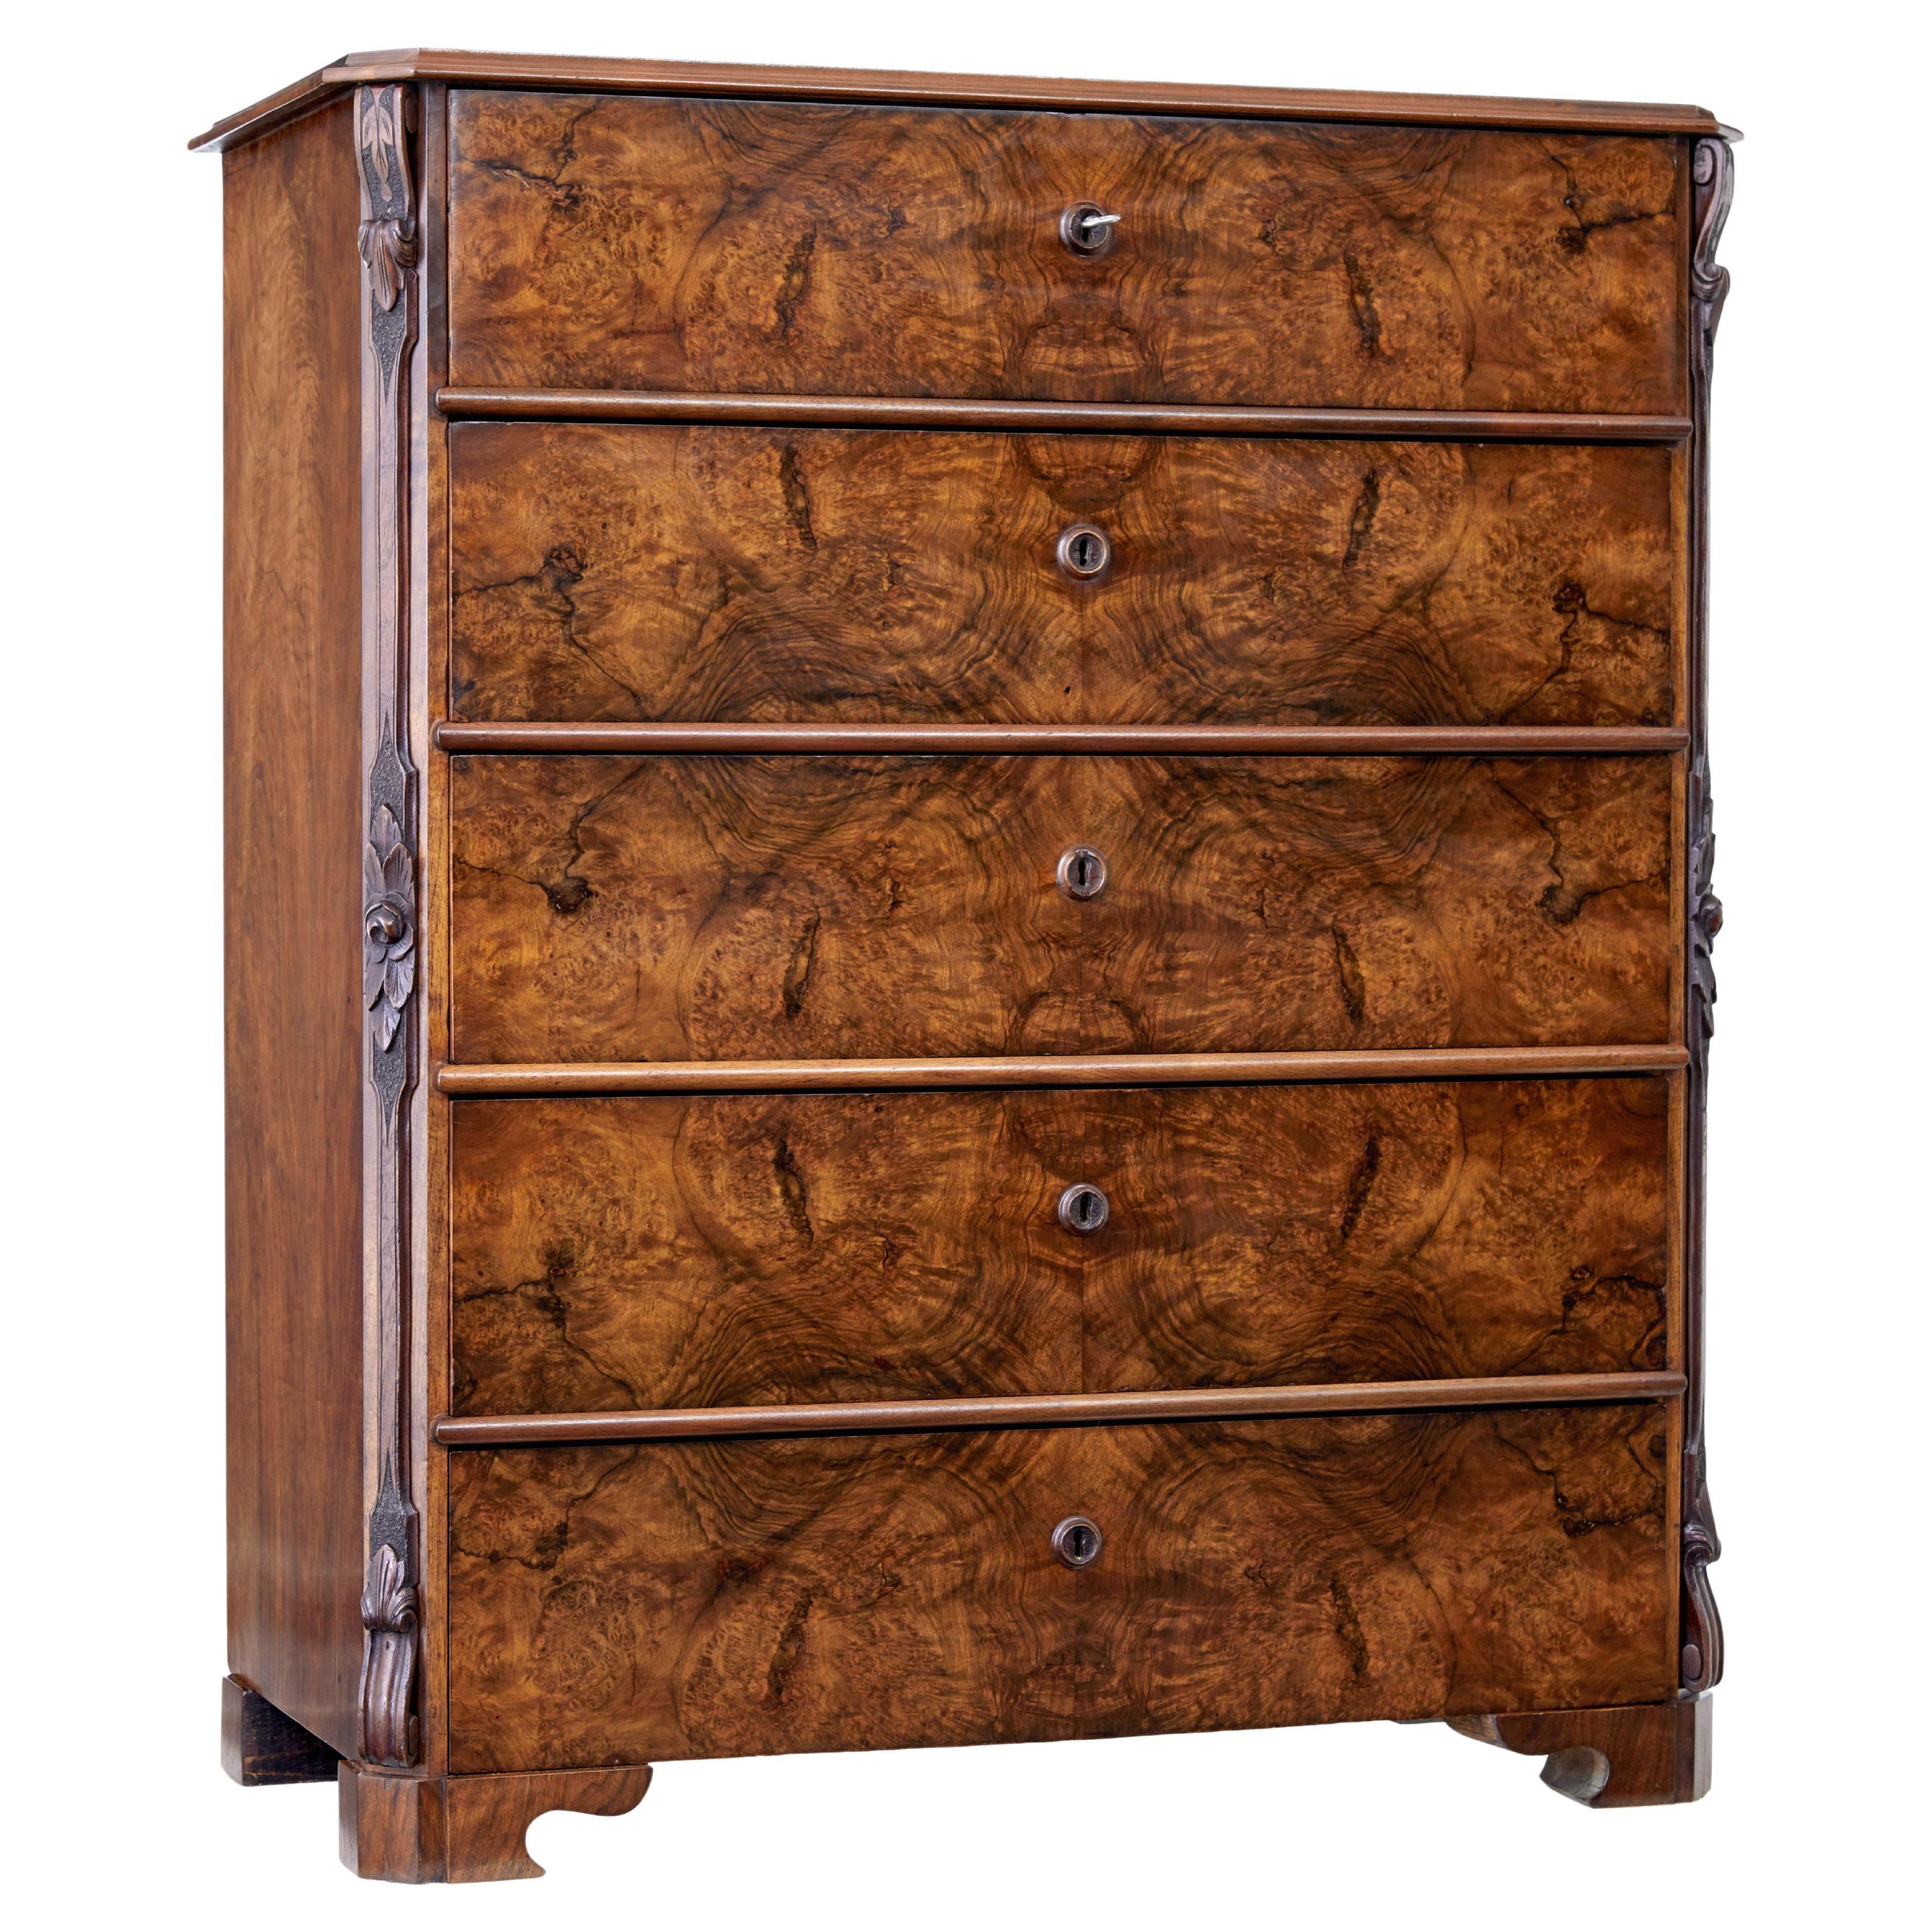 19th Century burr walnut tall chest of drawers For Sale